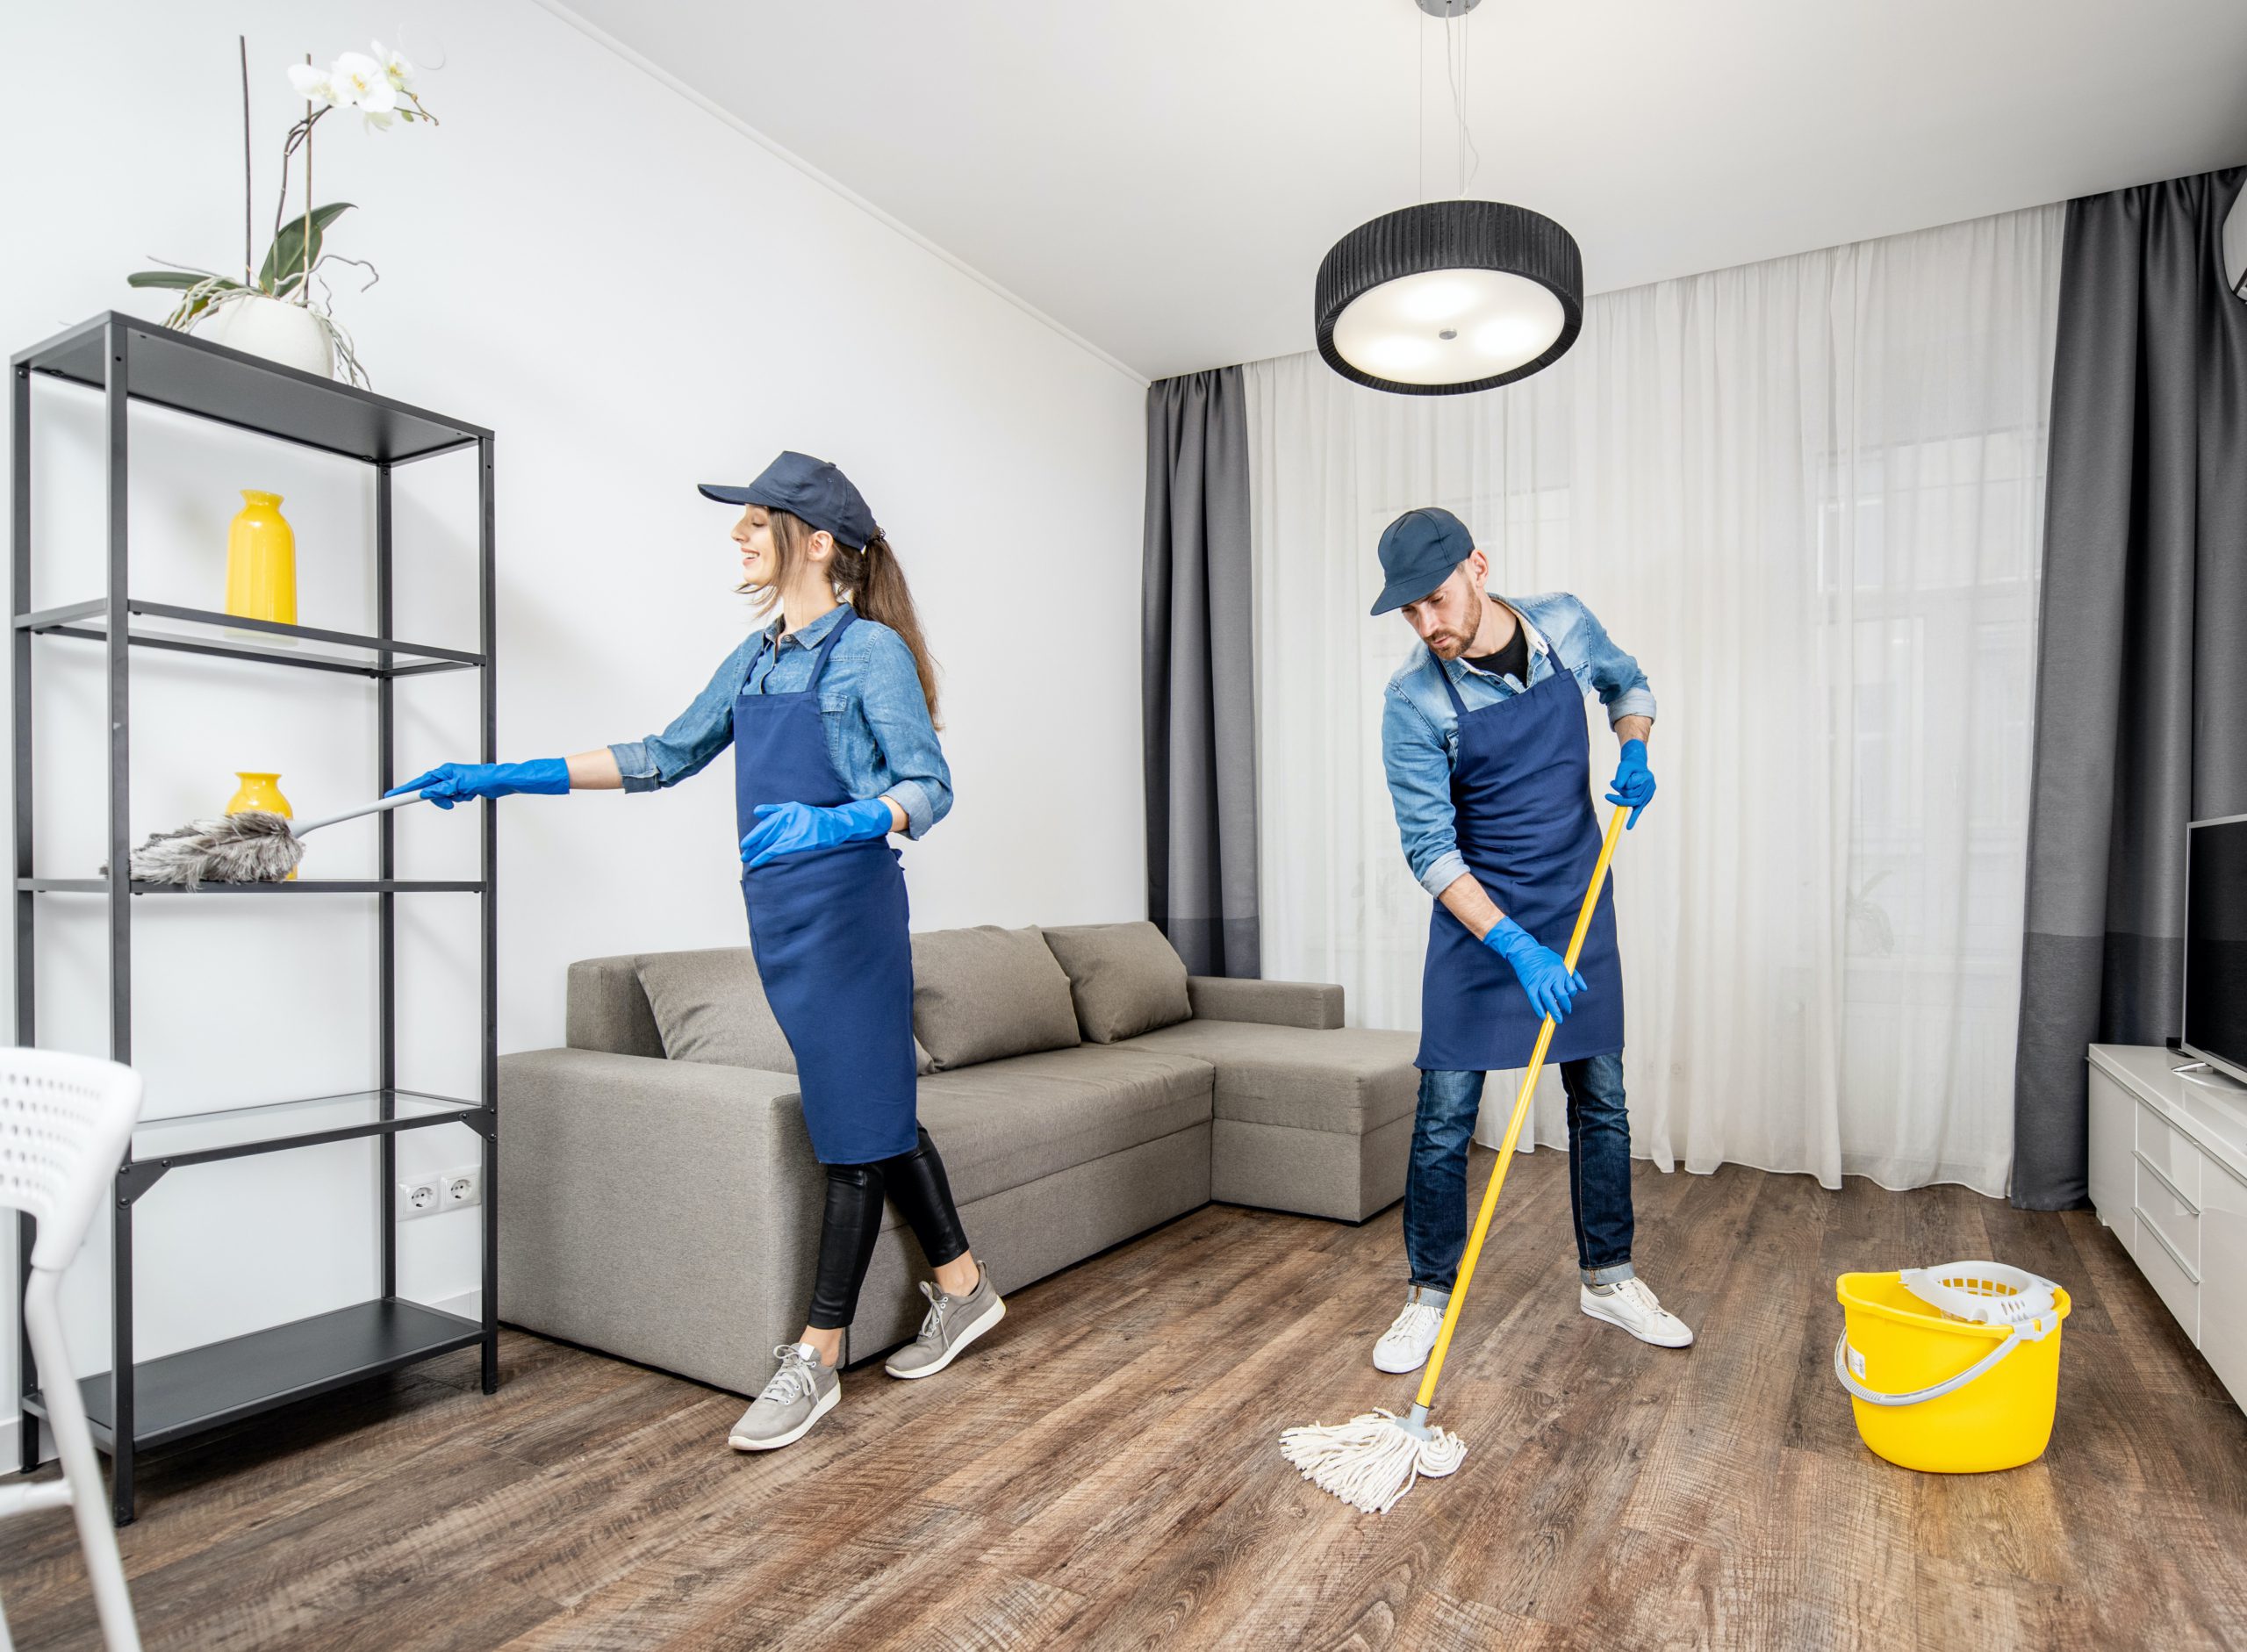 Household Cleaners and Professional Cleaners